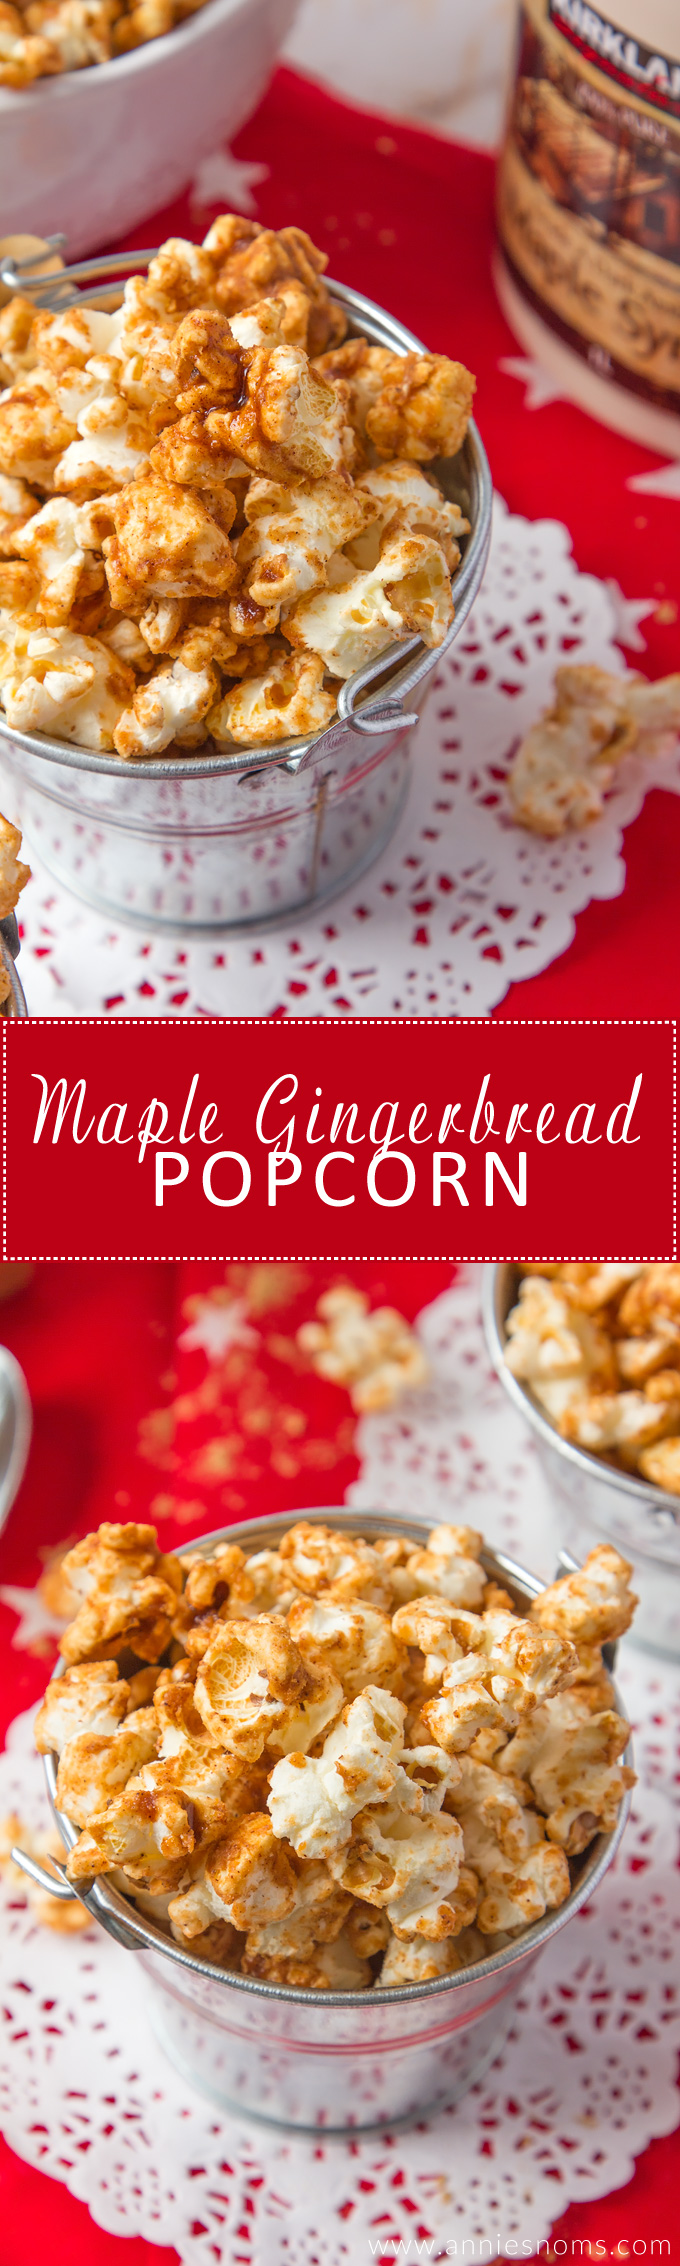 Maple syrup, plenty of ginger and some light brown sugar make this the perfect, easy to make snack!